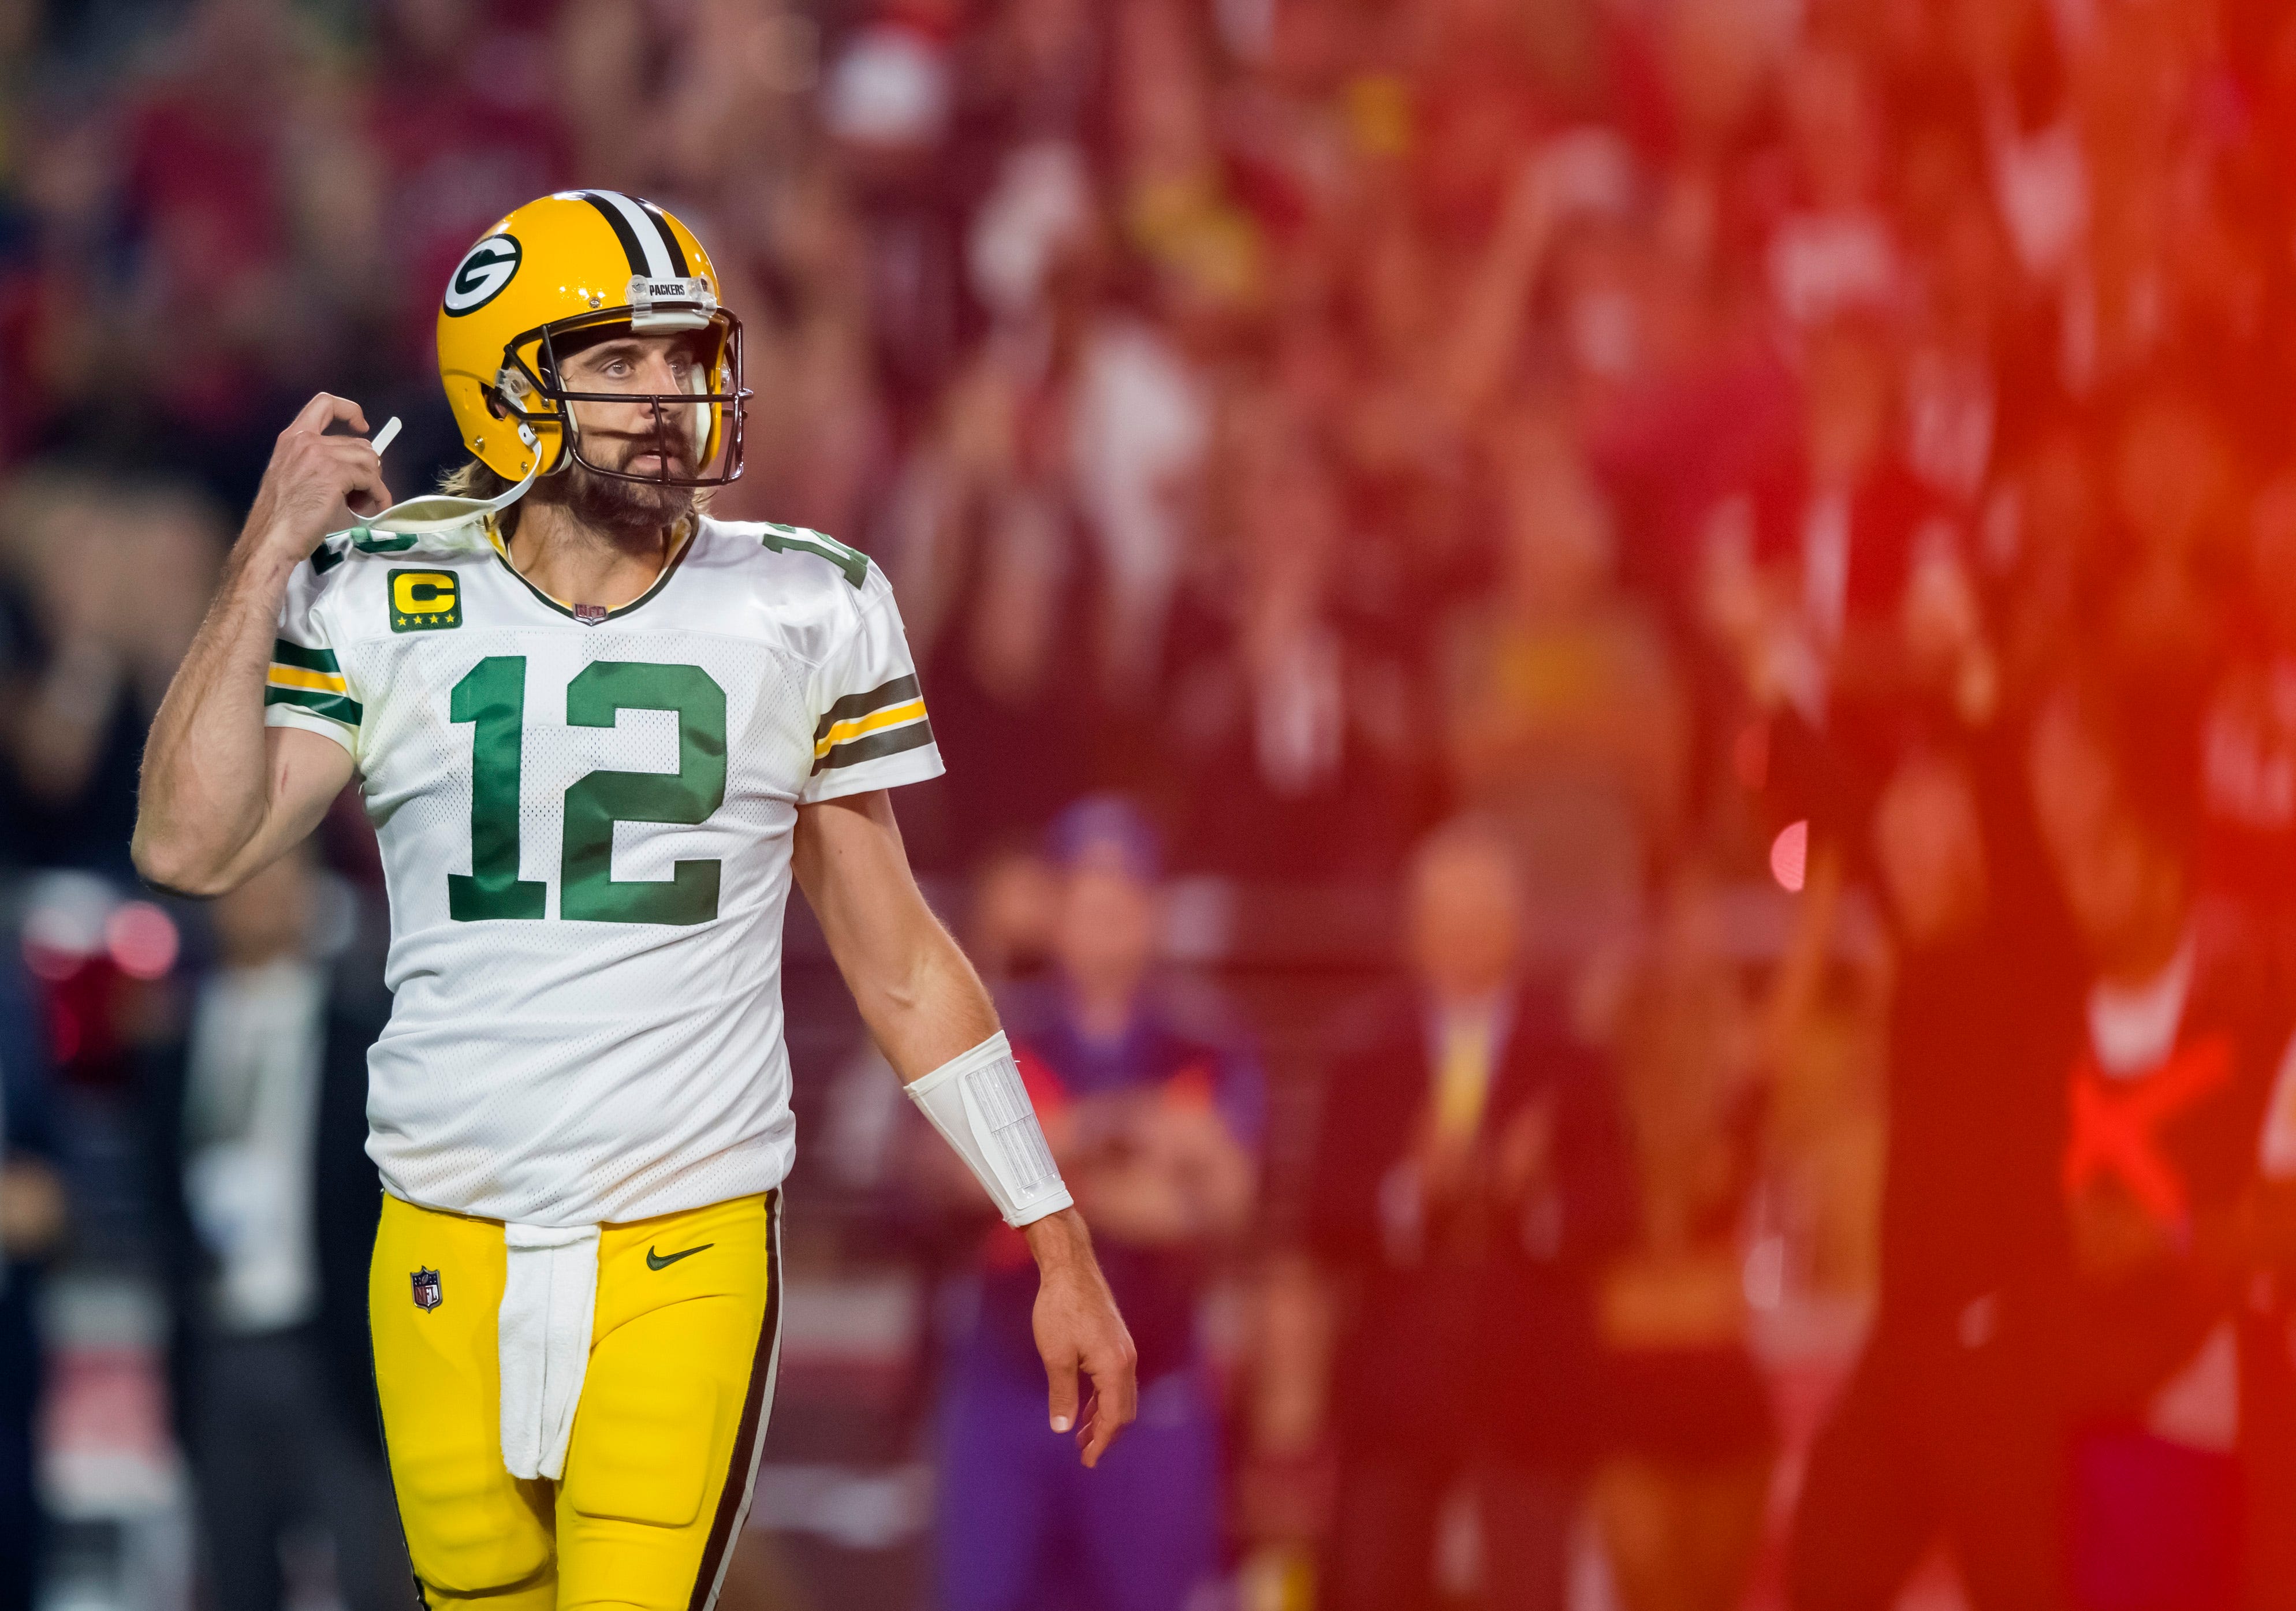 NFL fines Aaron Rodgers, Green Bay Packers for COVID-19 protocol violations